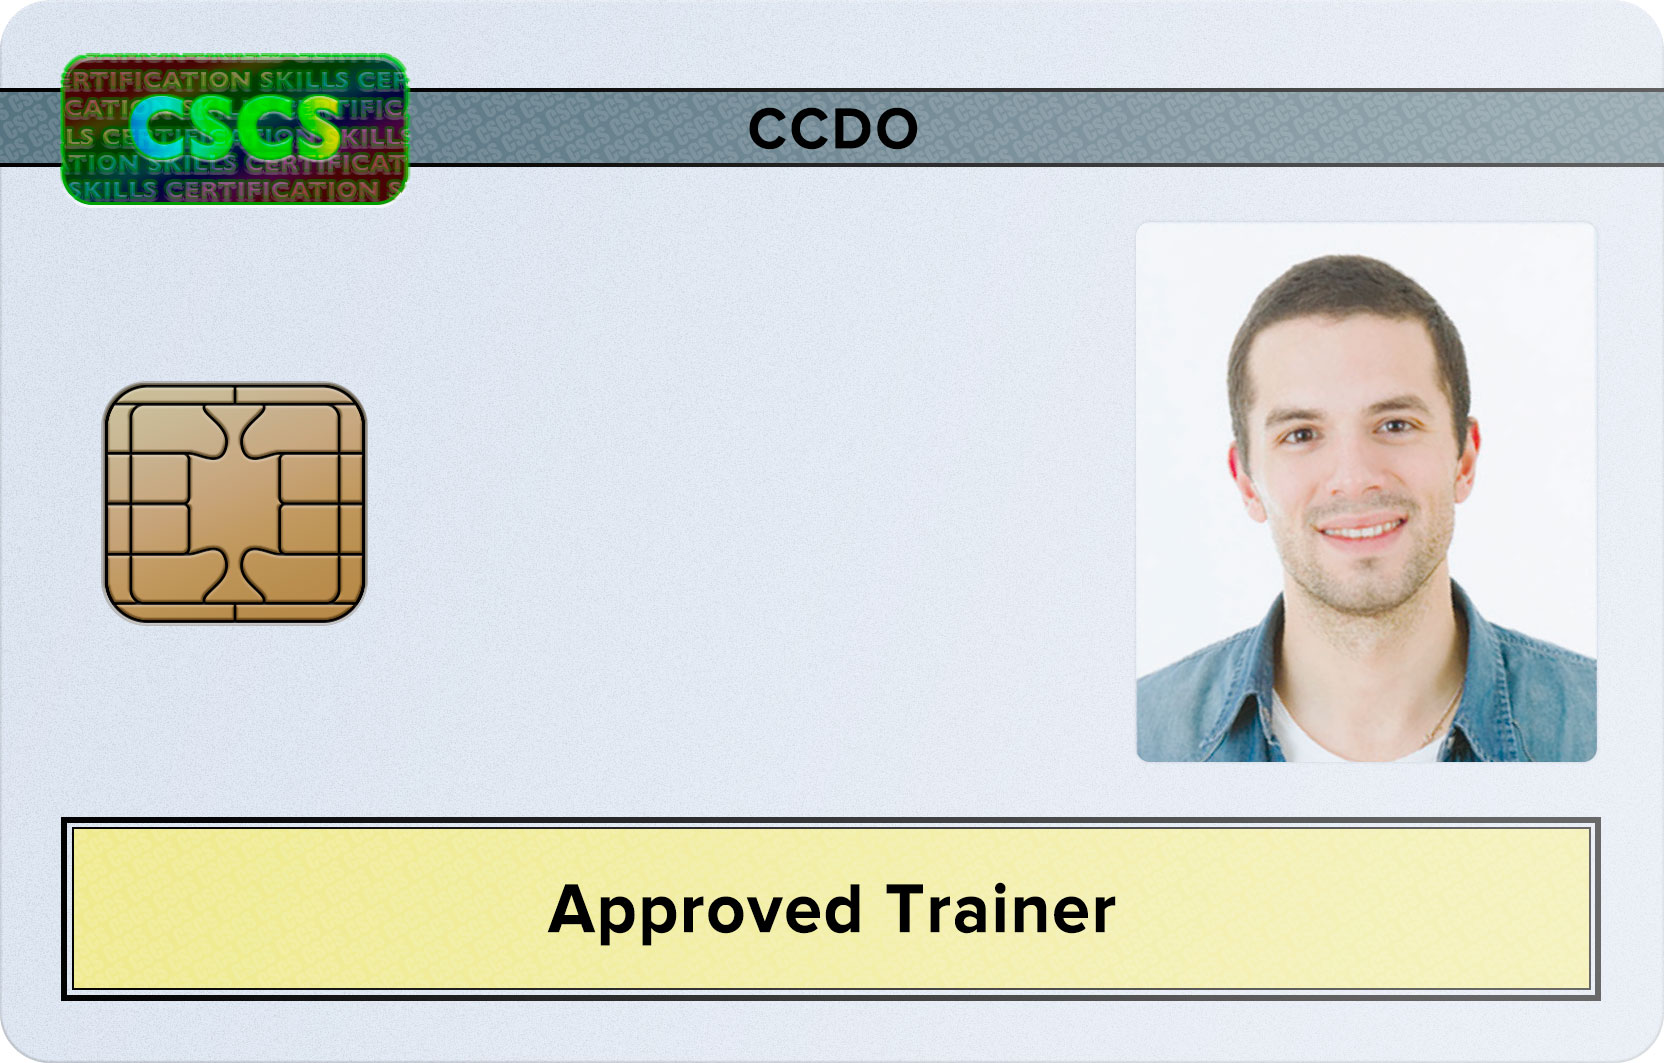 CCDO Approved Trainer